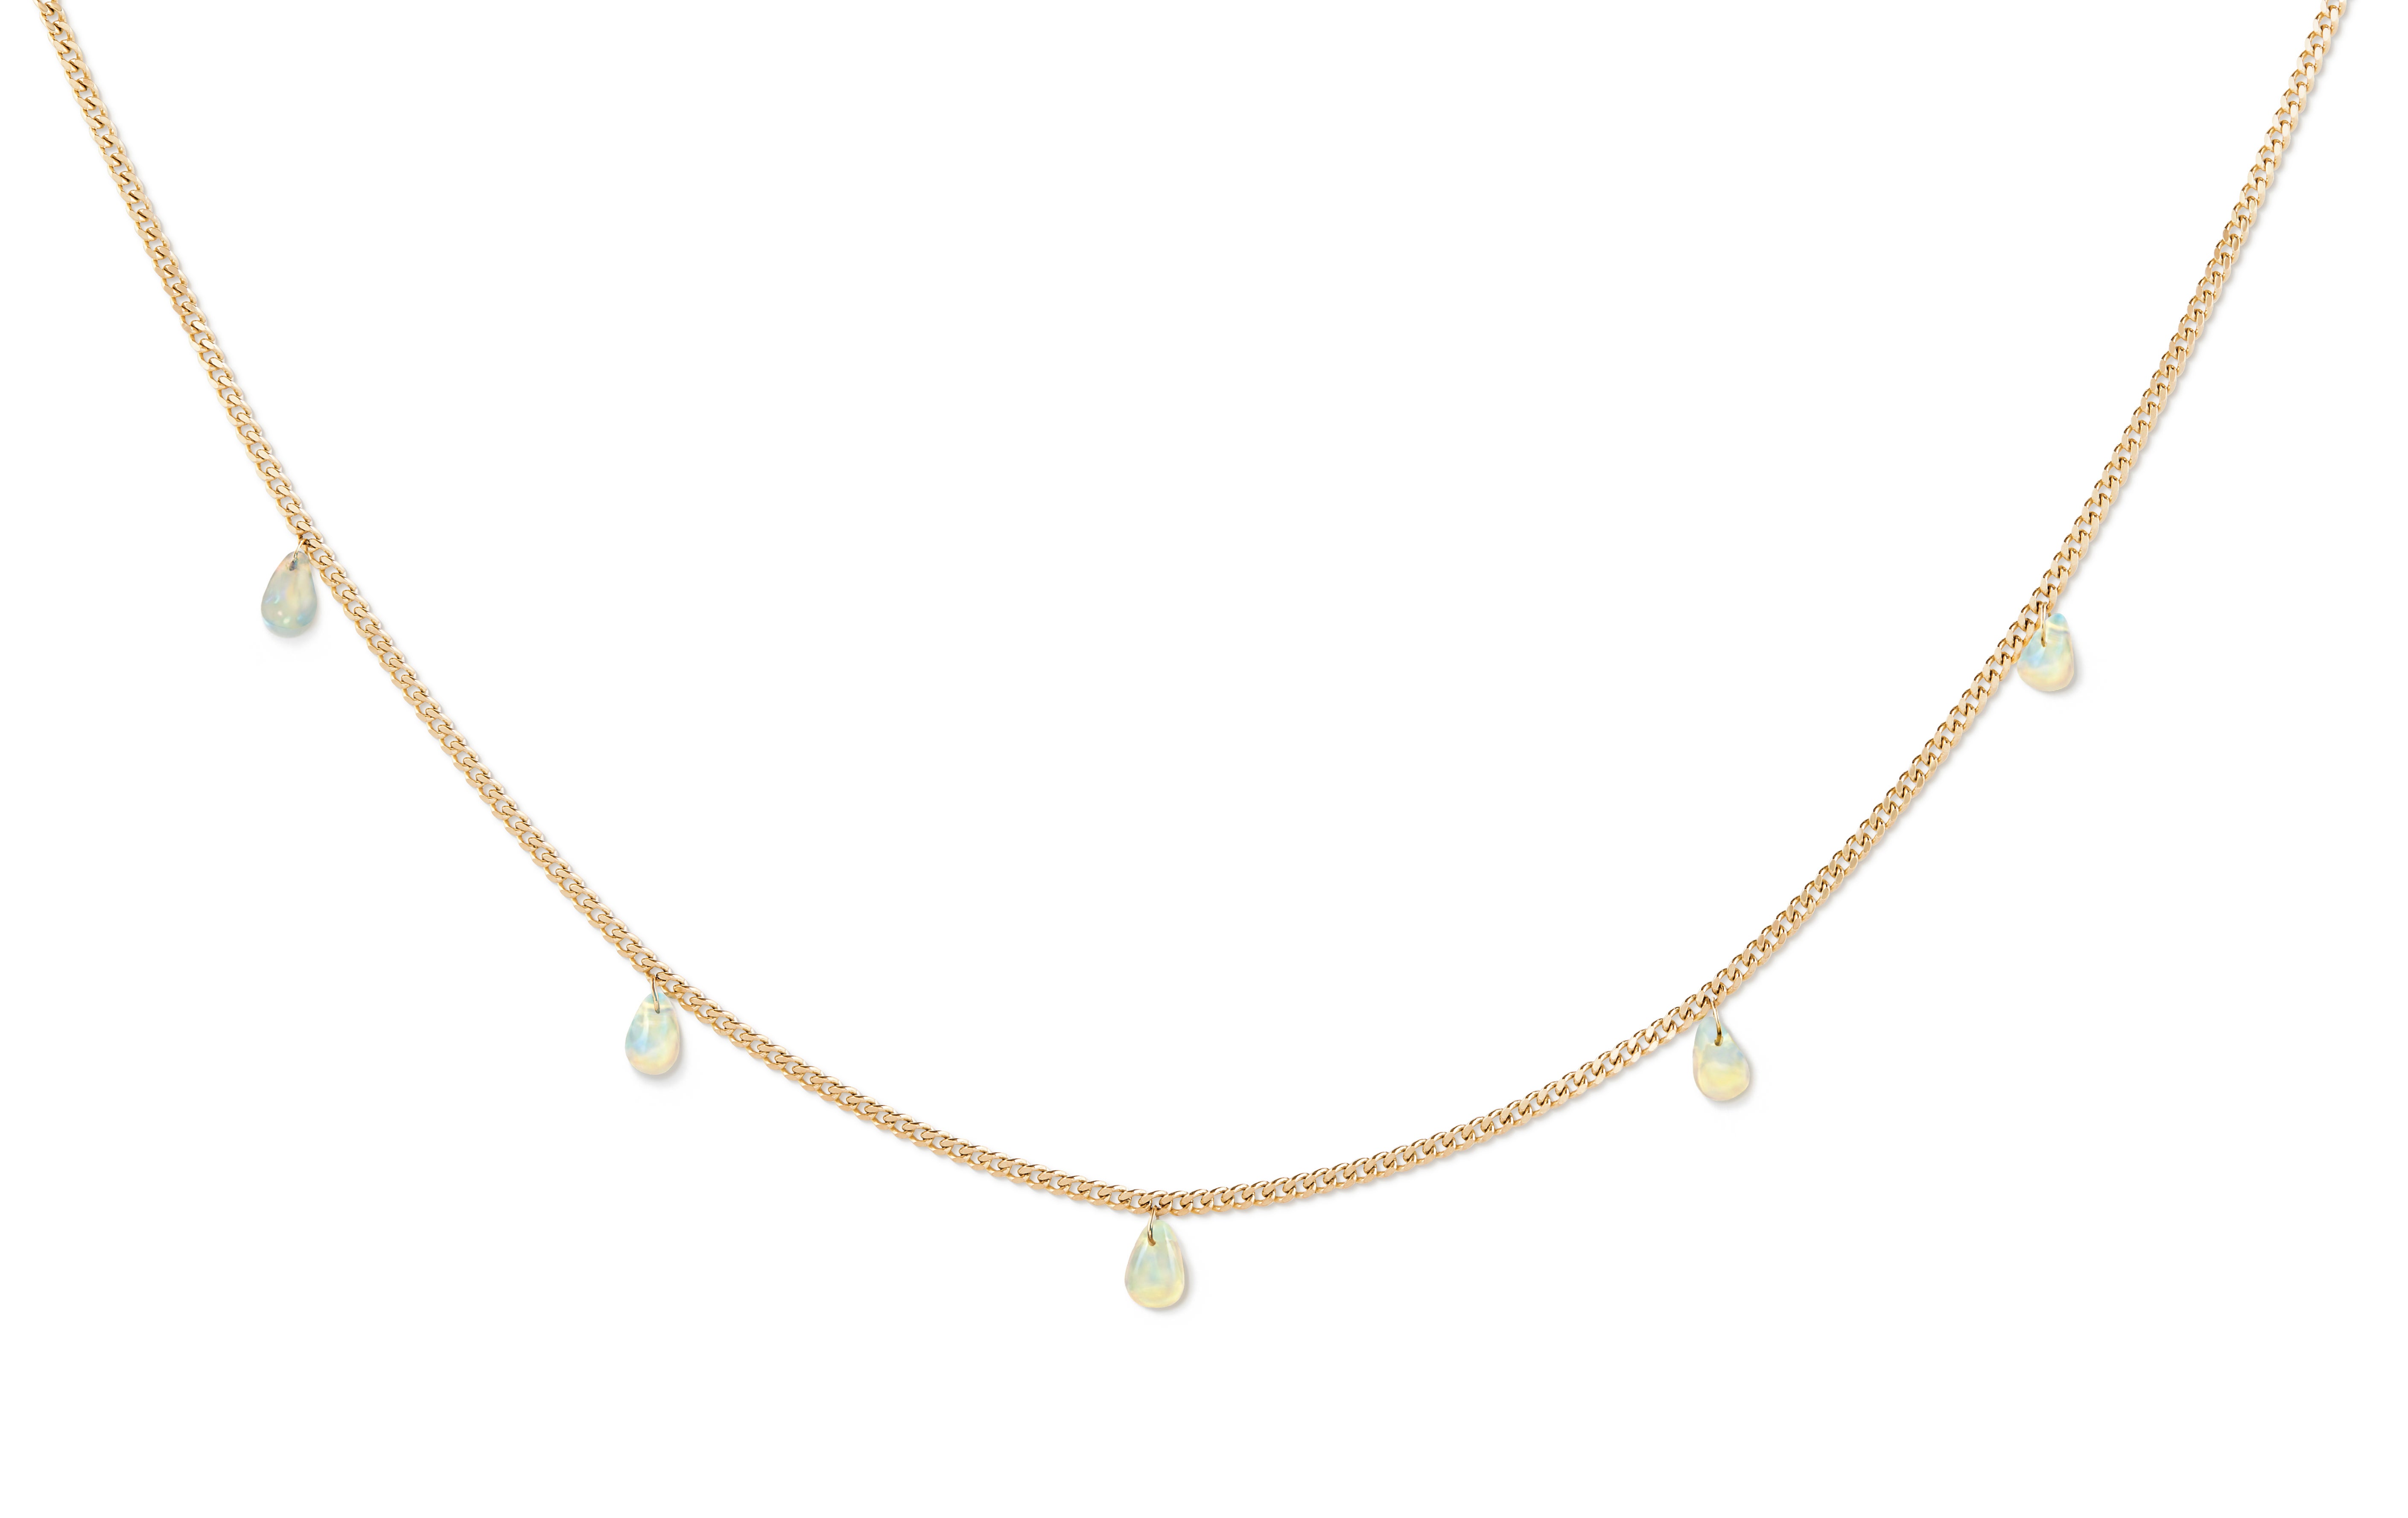 Opal and Curb Chain Necklace in 18 Karat Gold For Sale